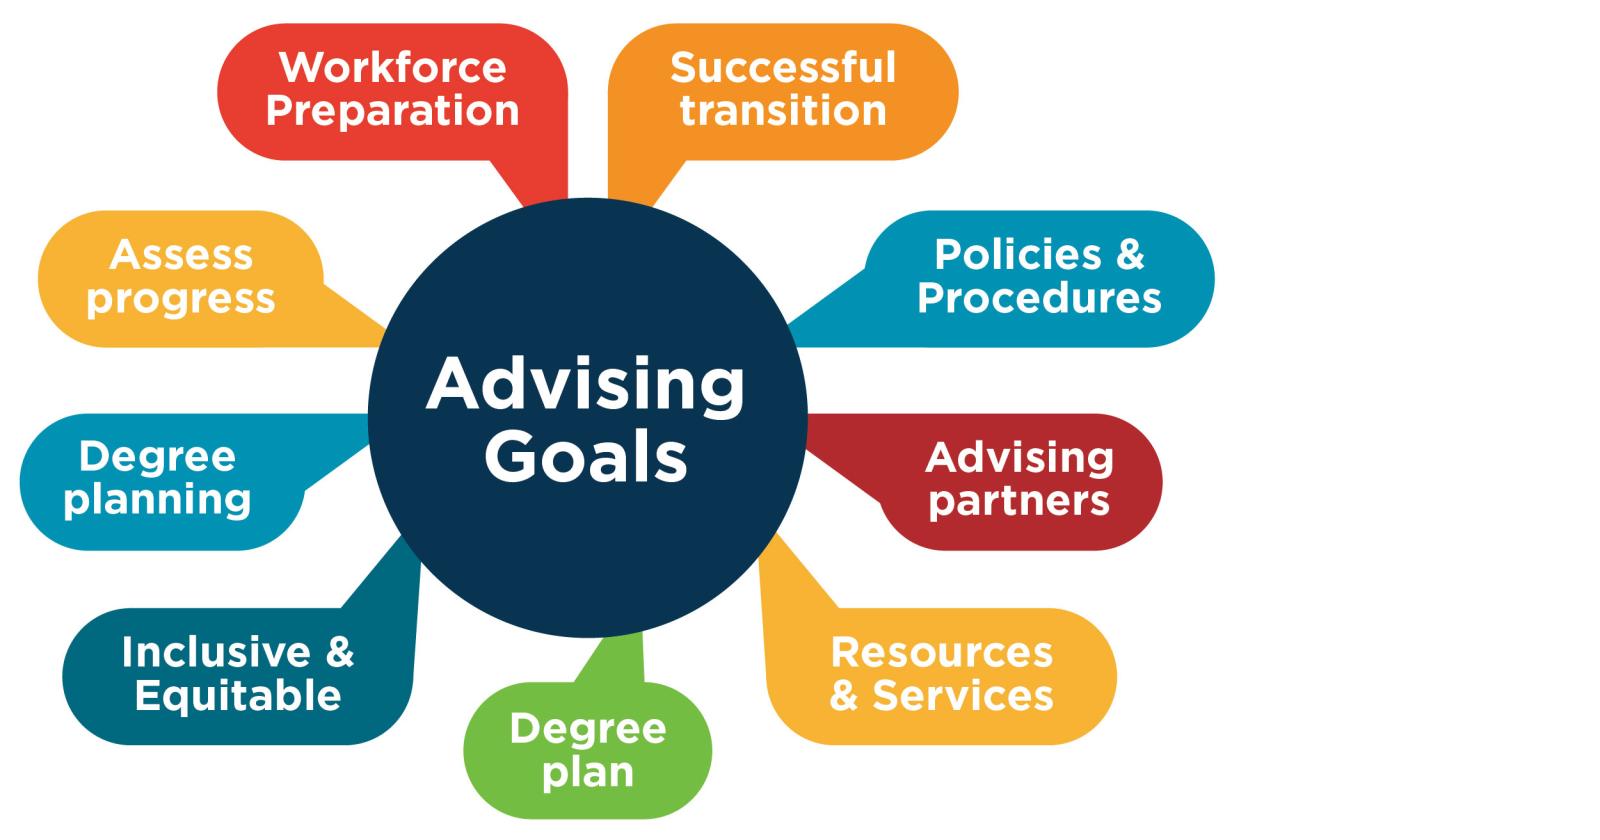 Bubble saying advising Goals with connected speech bubbles that say Successful Transition, Policies & Procedures, Advising Partners, Resources and Services, Degree Plan, Unclusive & Equitable, Degree Planning, Assess Progress, and Workforce Preparation 